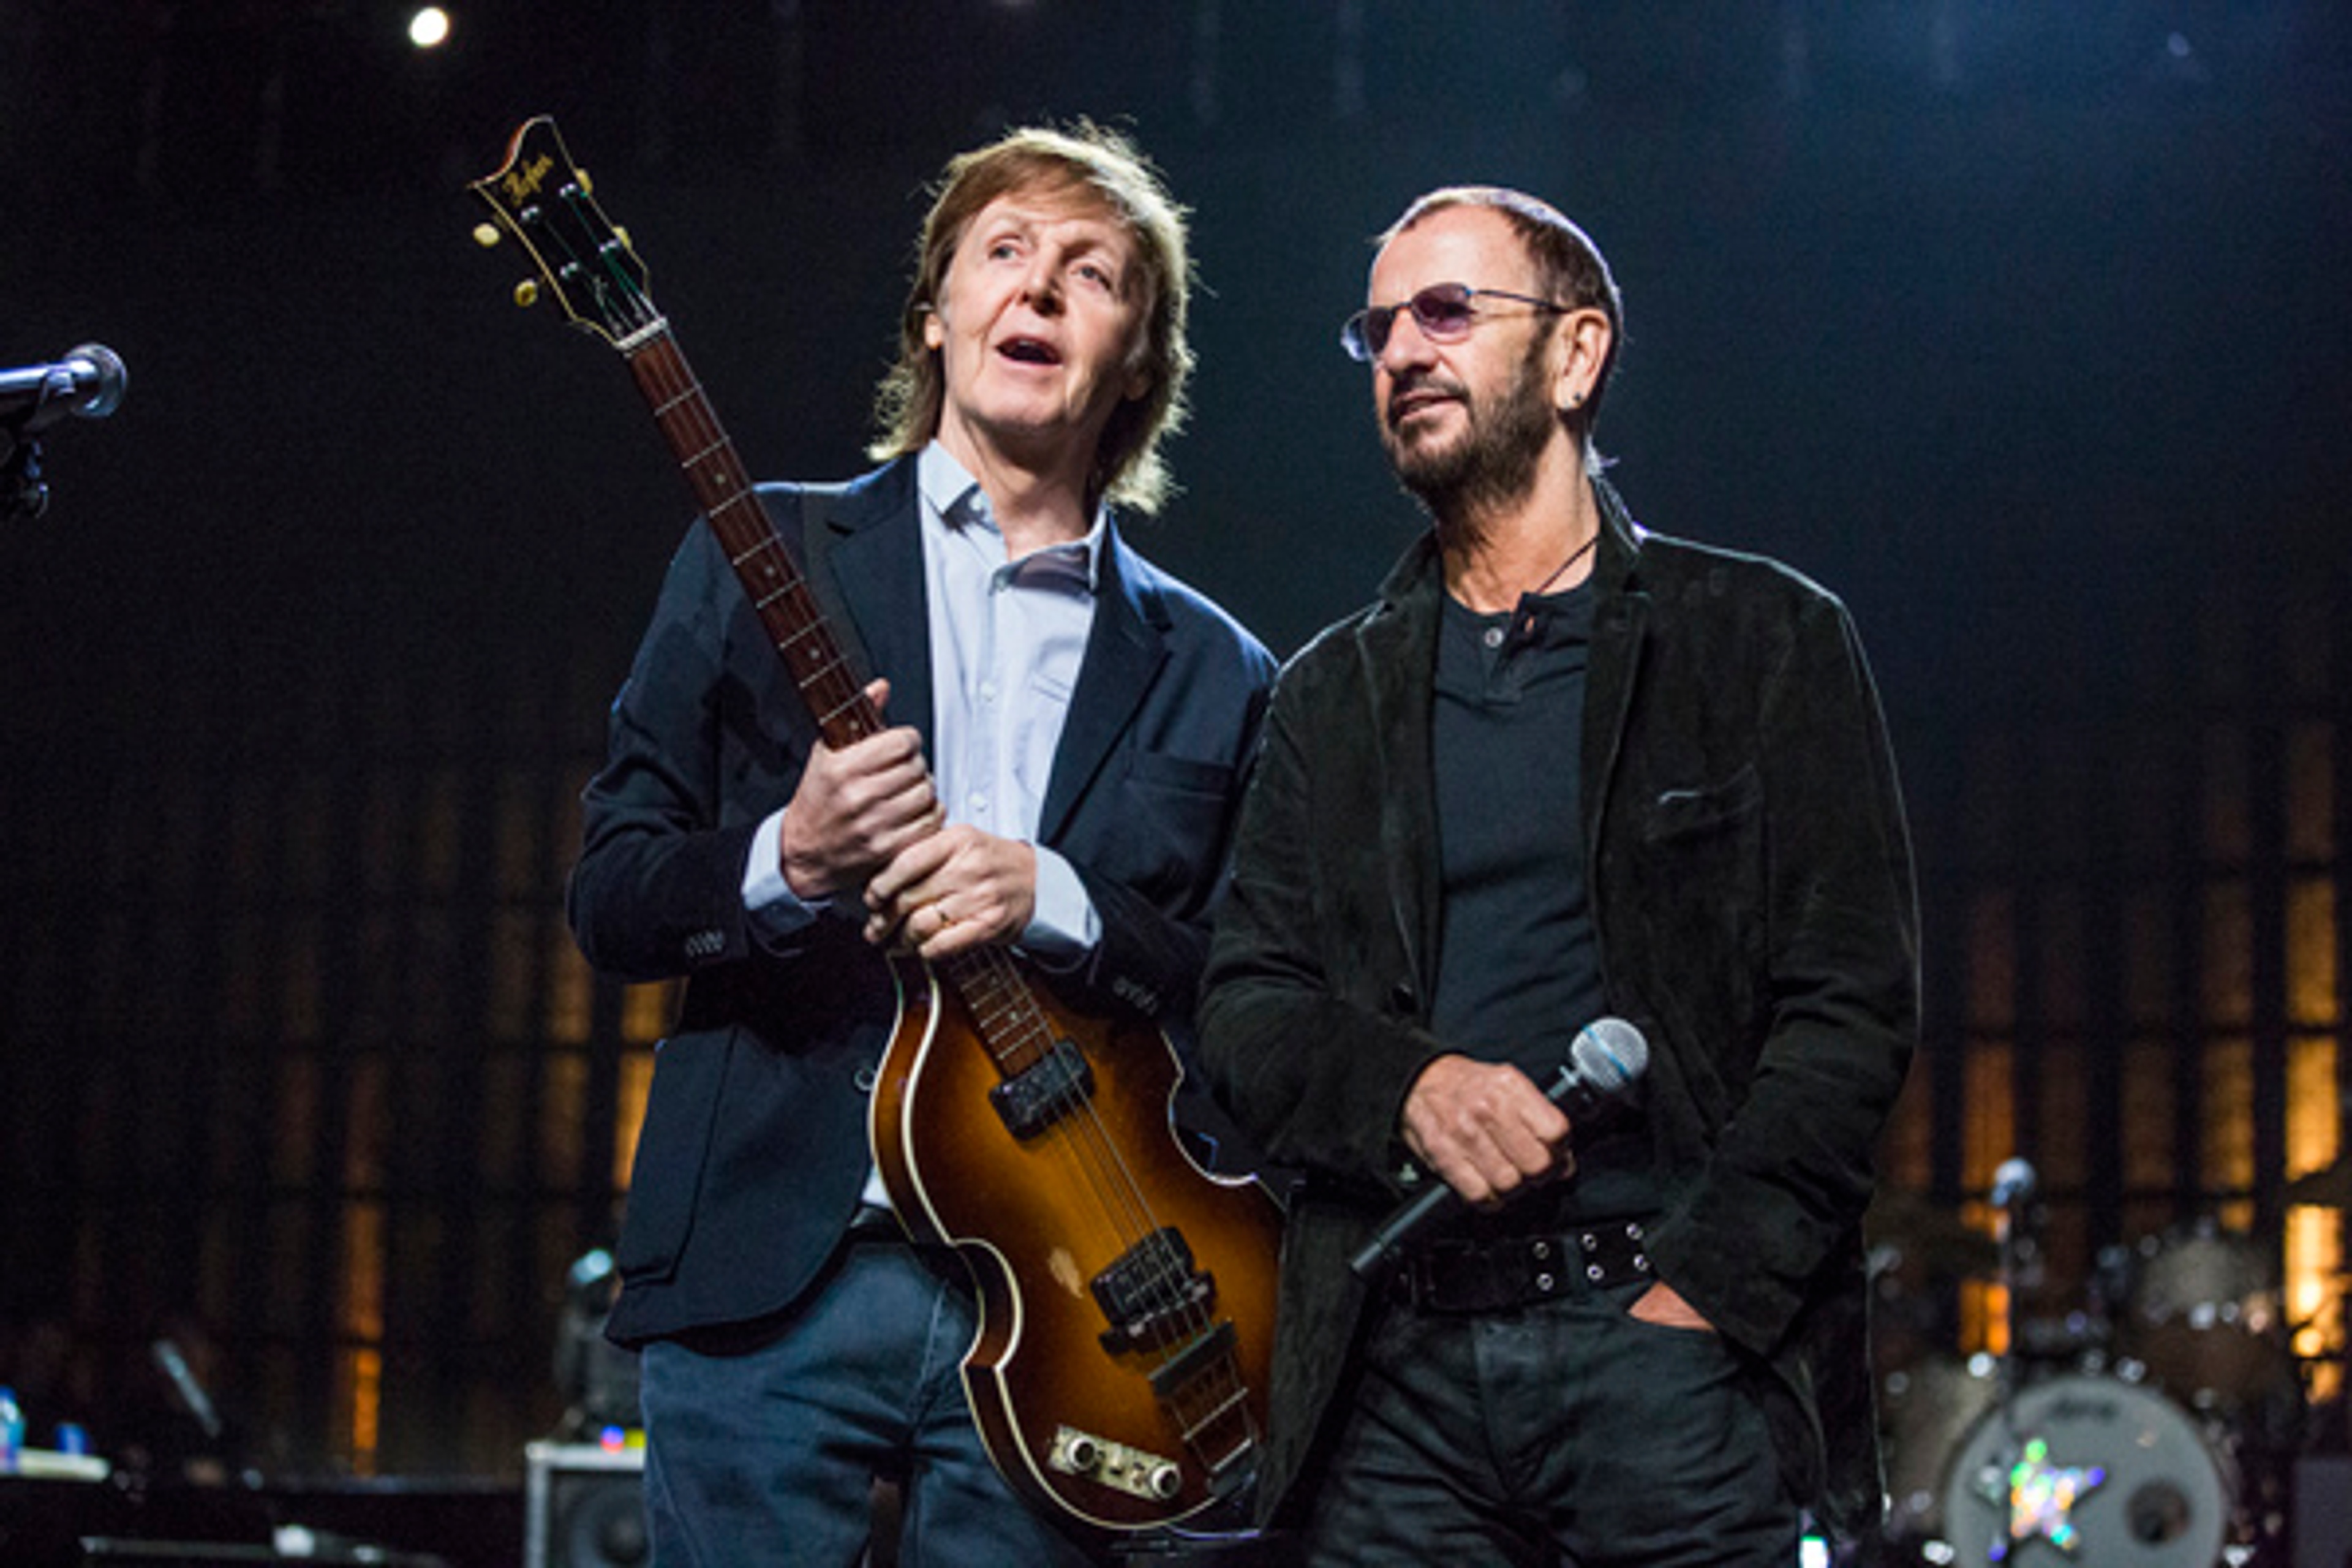 Paul McCartney inducts Ringo Starr into the Rock and Roll Hall of Fame